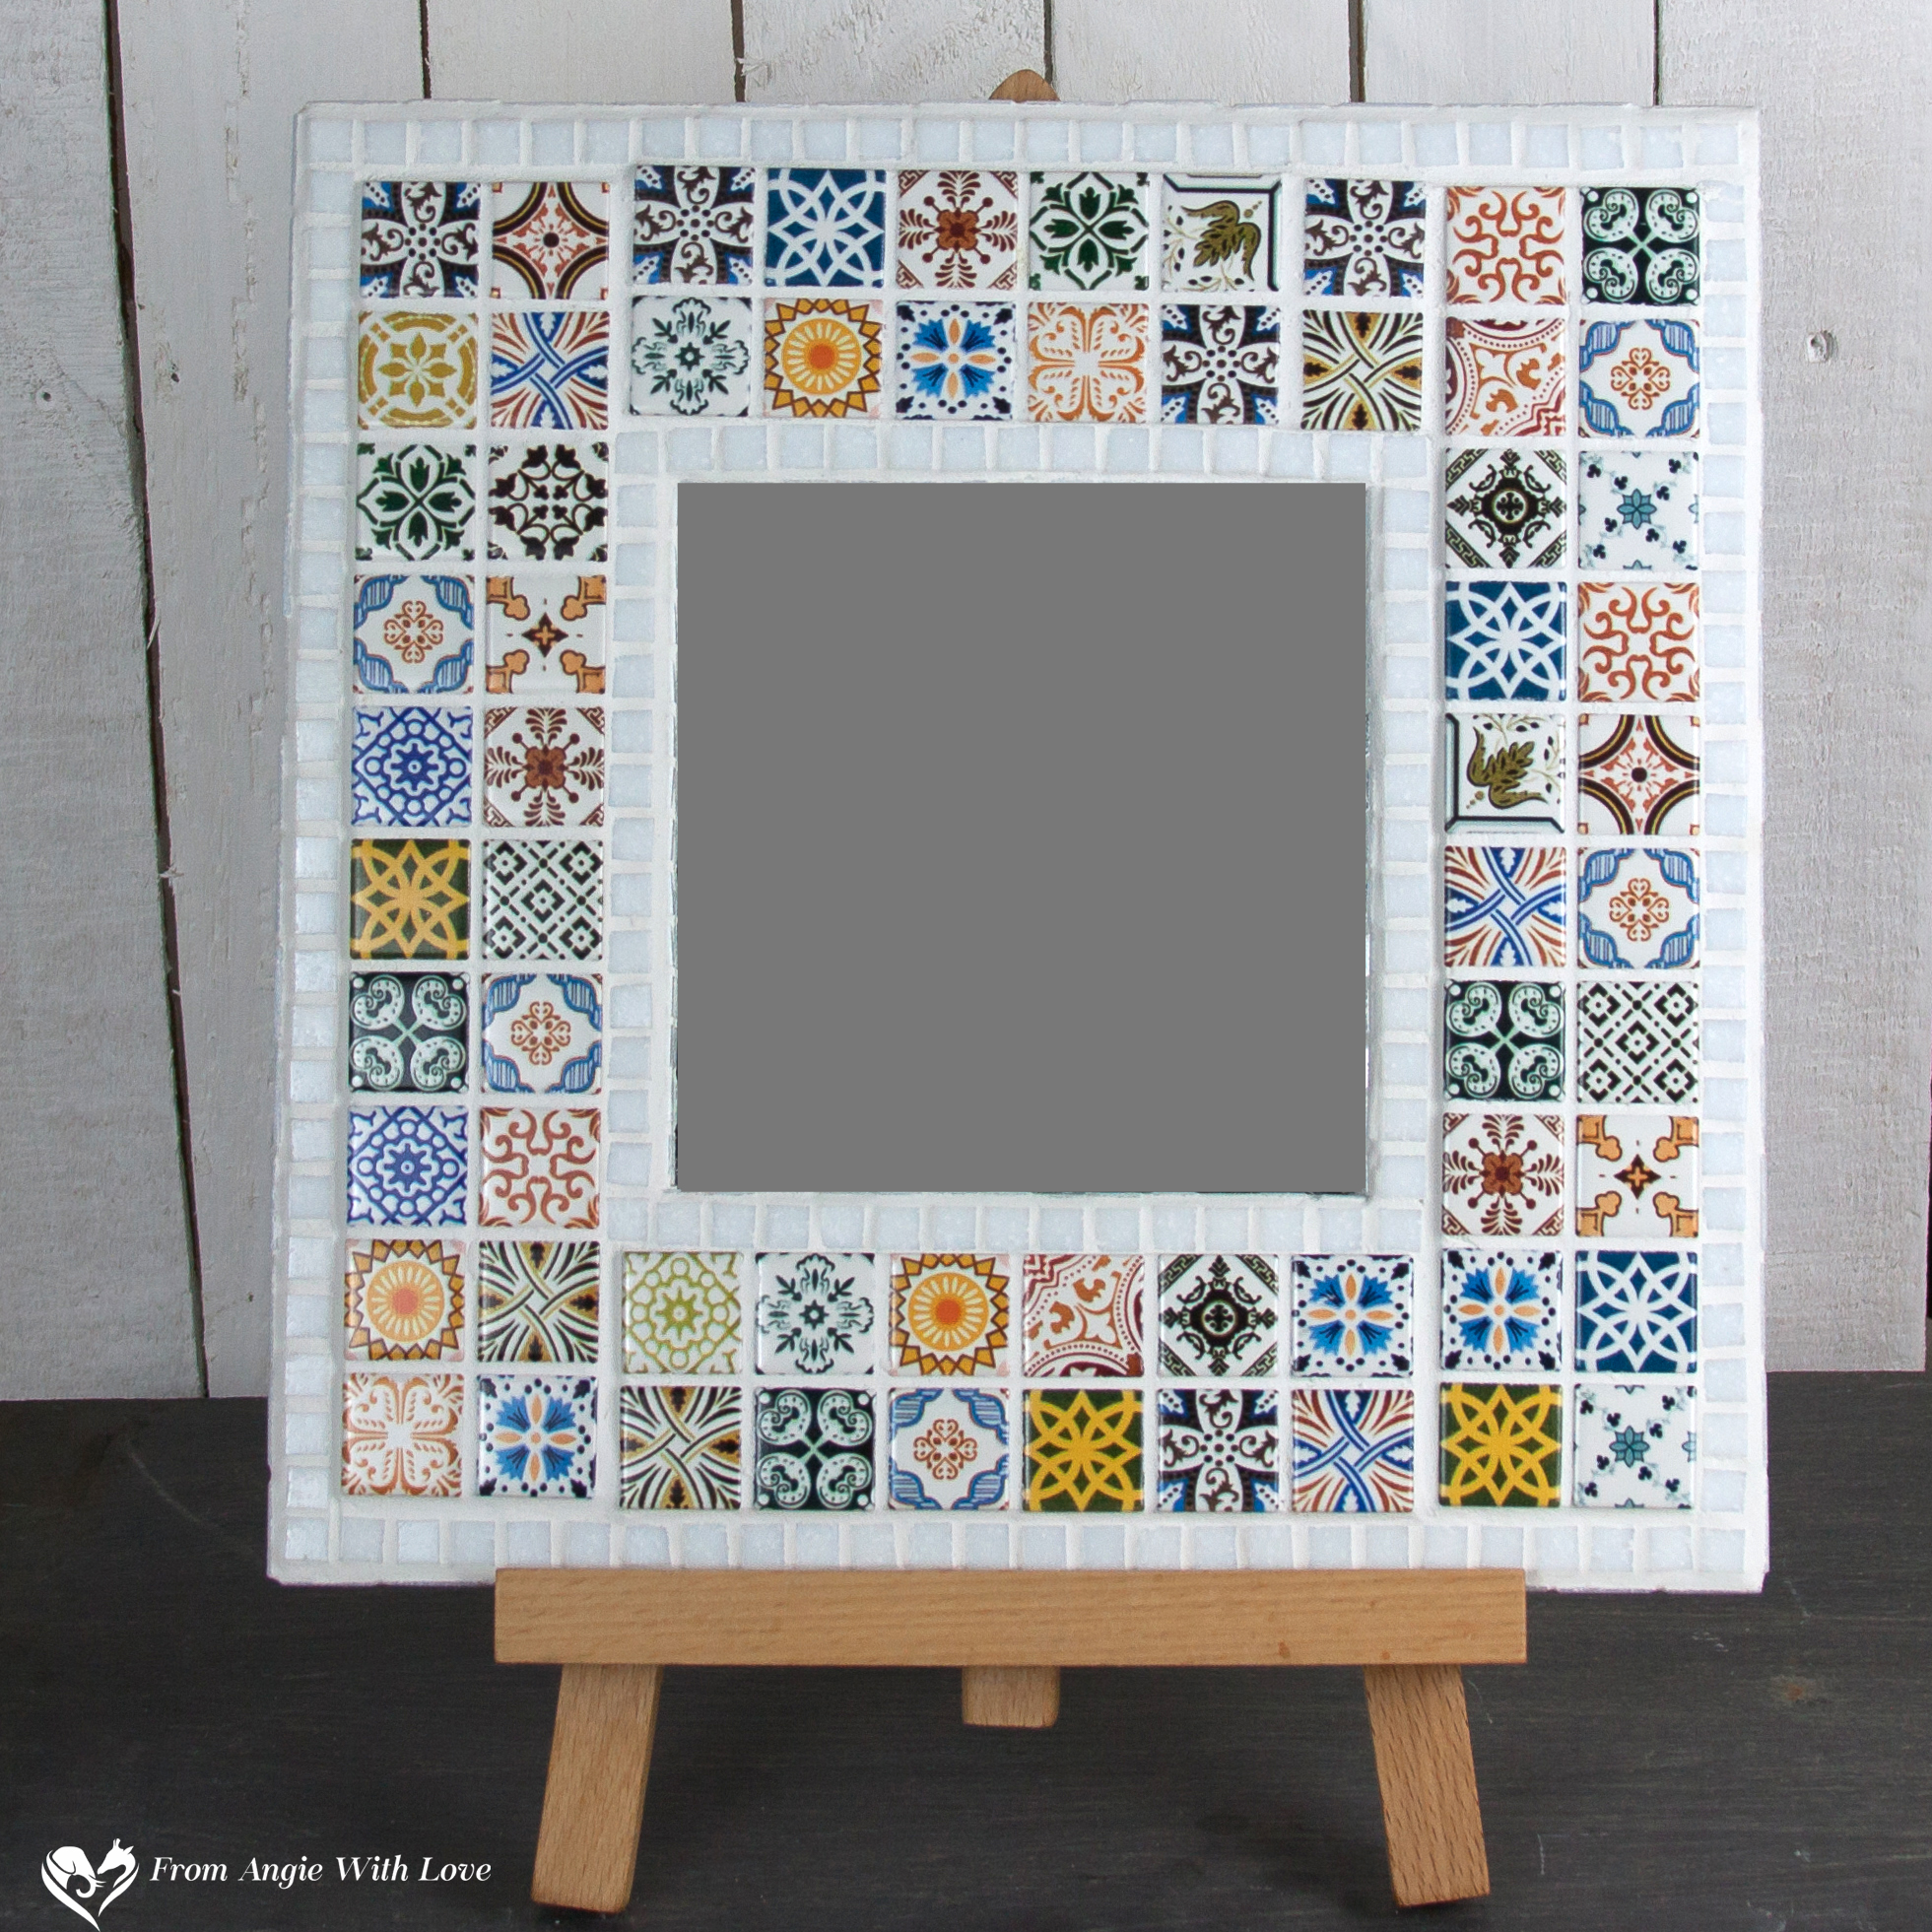 Hand-decorated mosaic mirror with Moroccan-style tiles